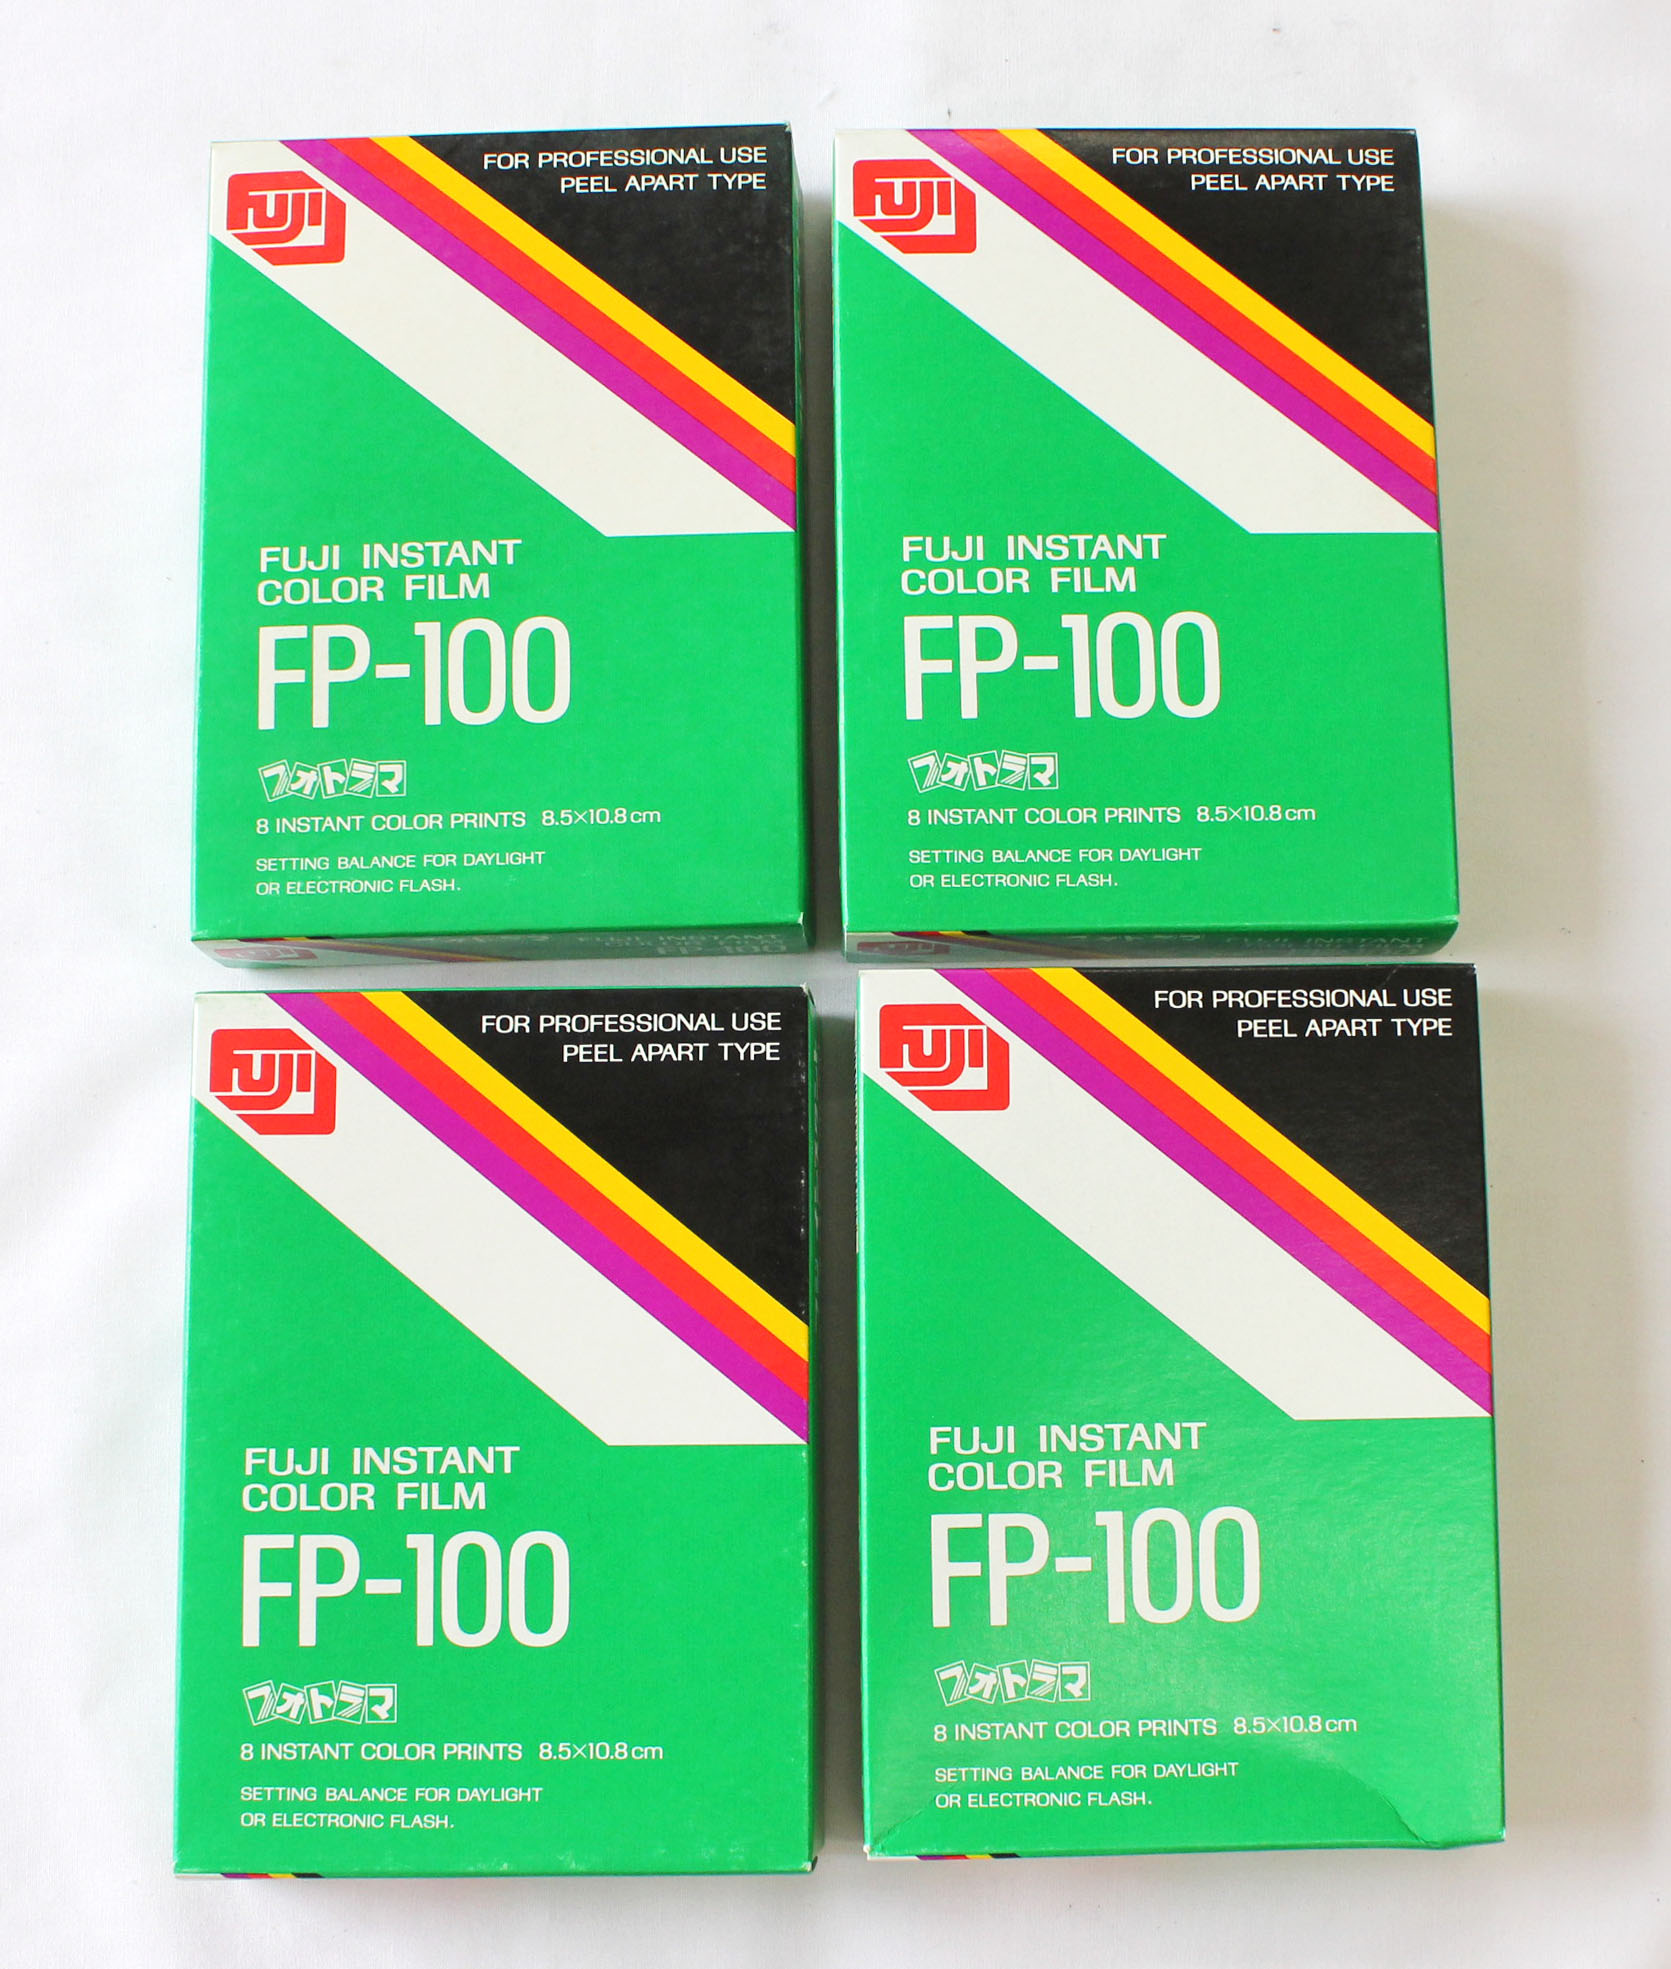 Japan Used Camera Shop | [New] Fujifilm FP-100 C Instant Color Film Set of 4 (Exp 1989) from Japan